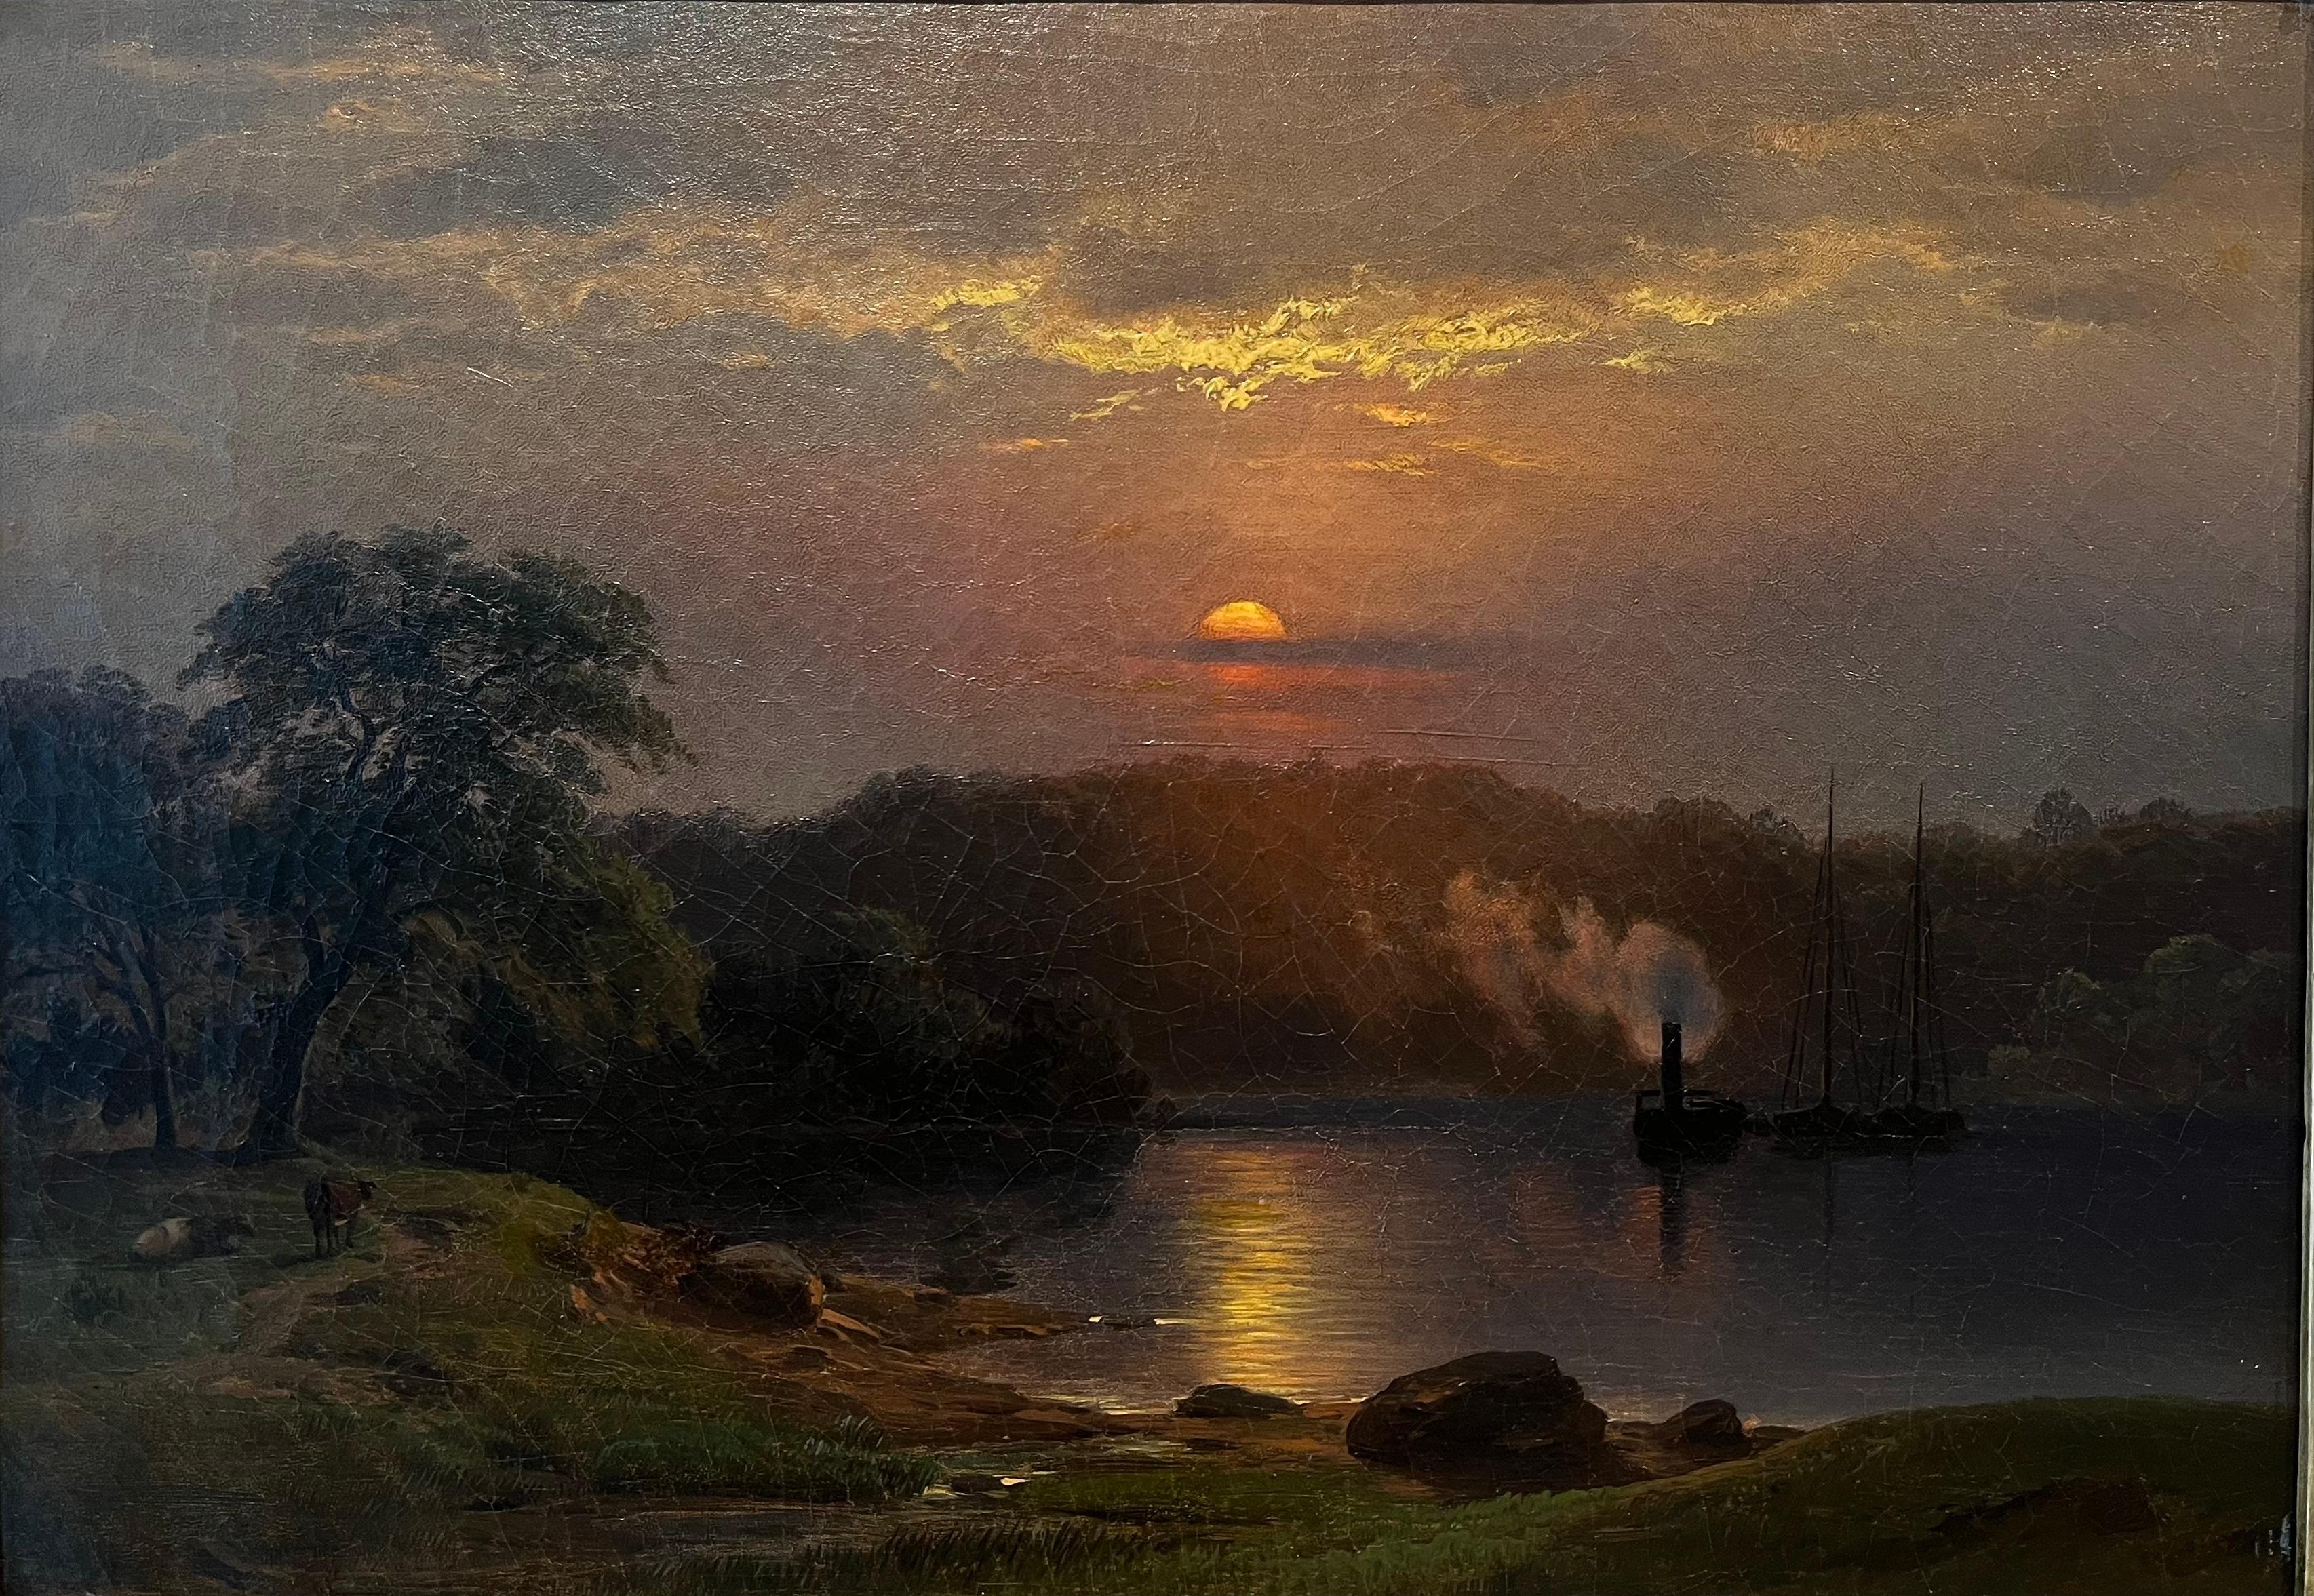 Sunset Boating Landscape - Painting by Paul Weber